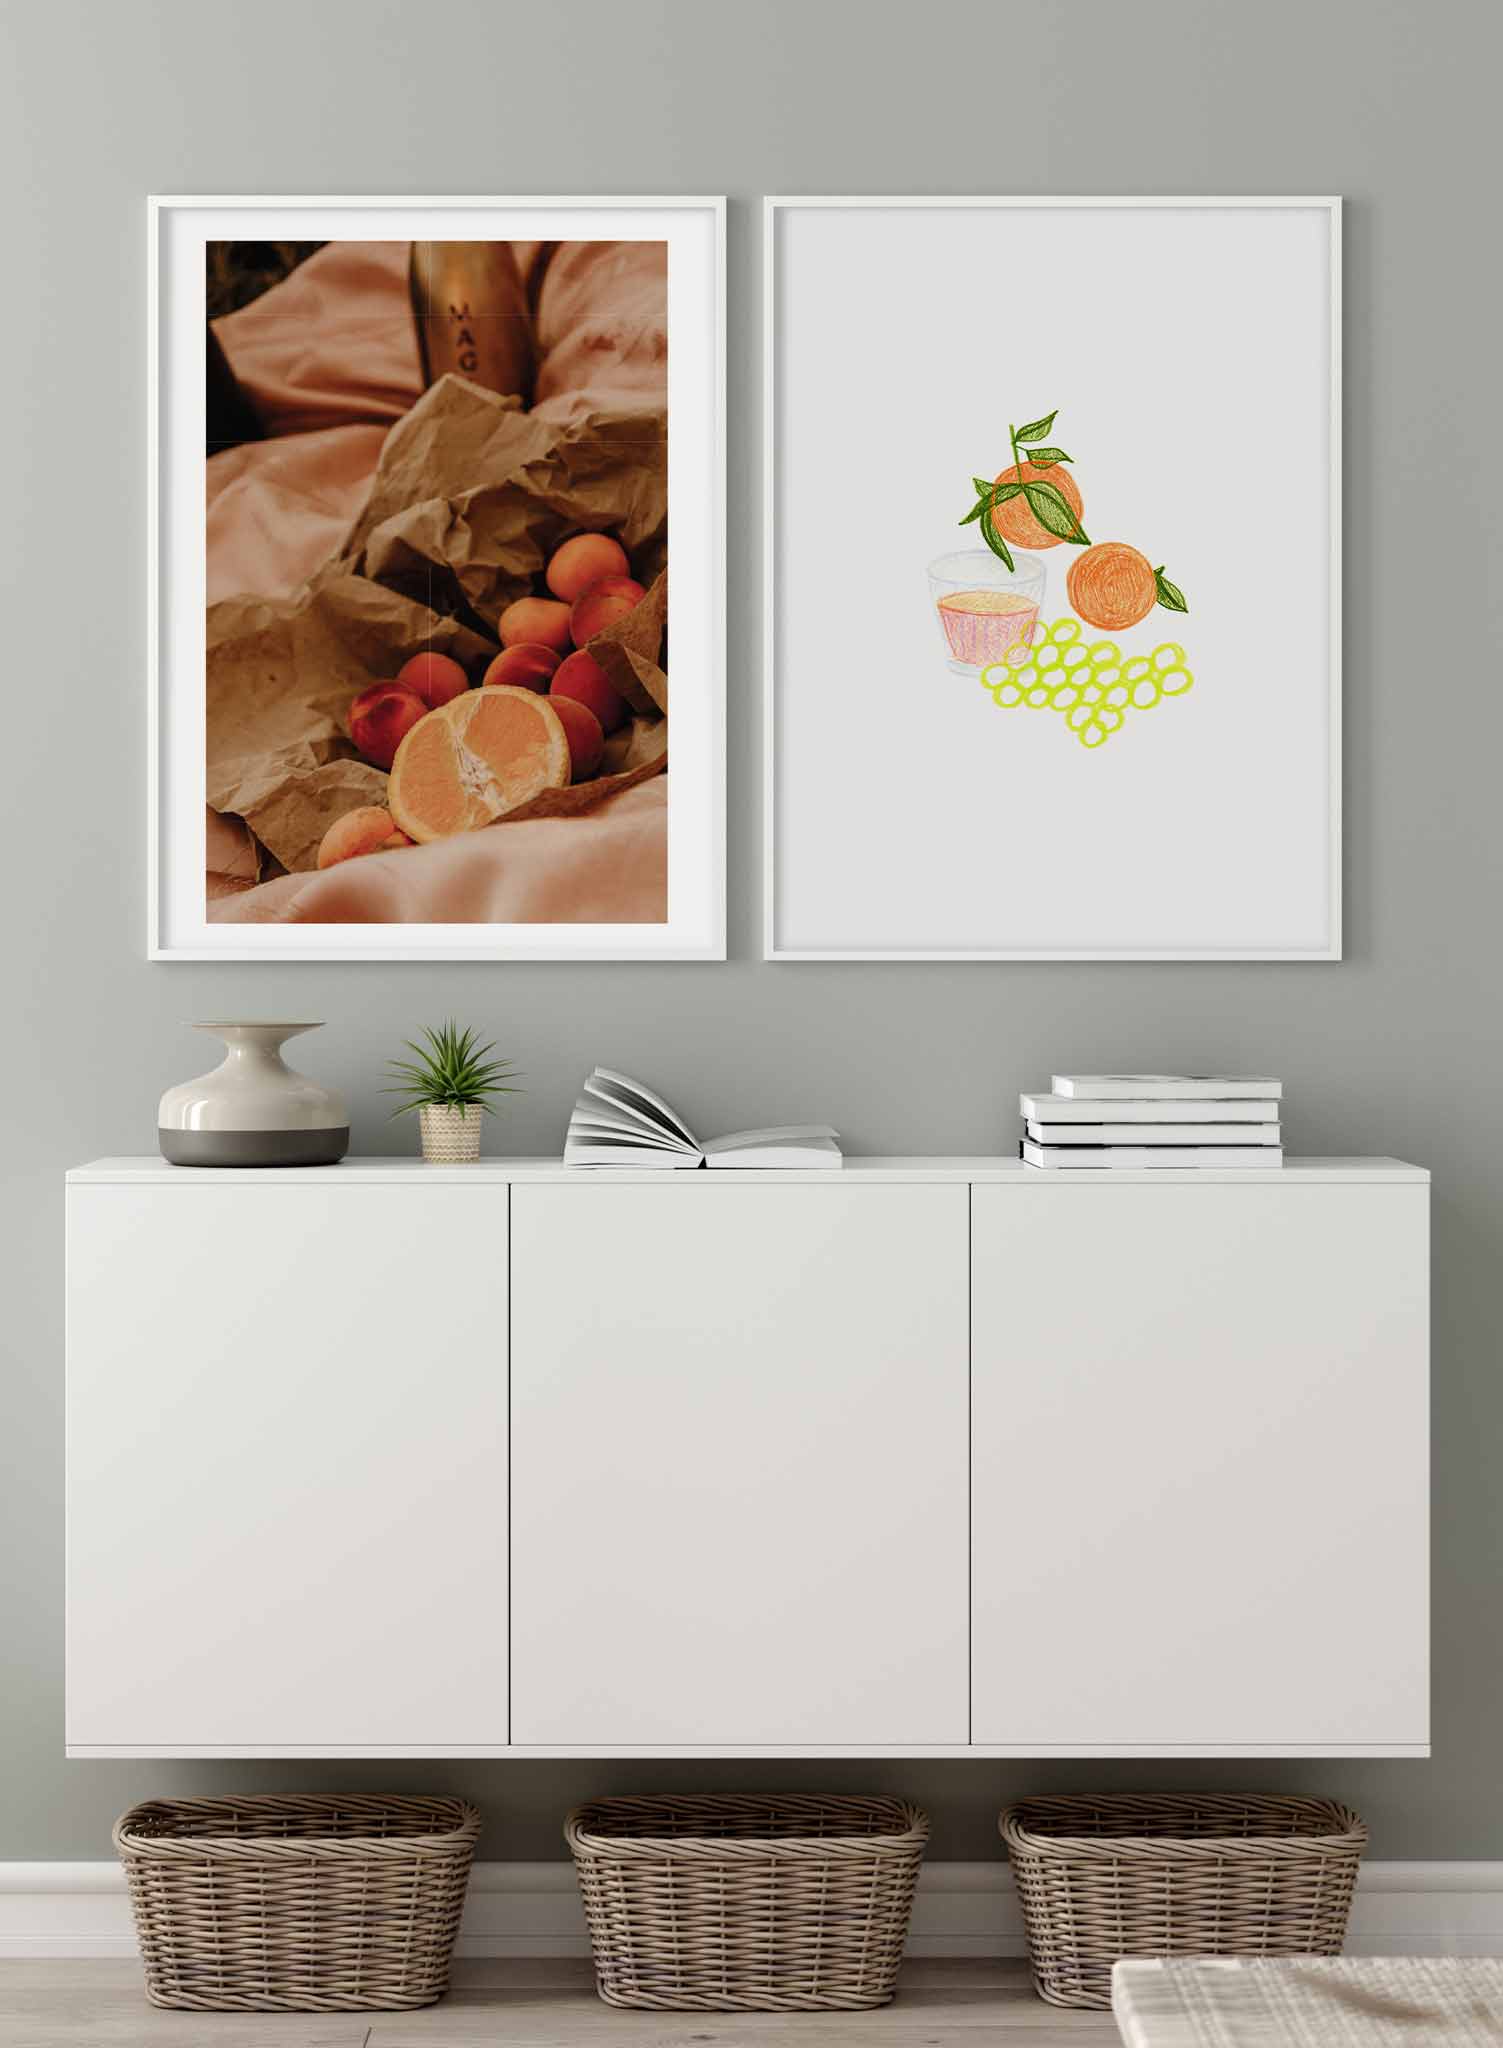 Picnic at Sunset is a citrus picnic photography poster by Opposite Wall.